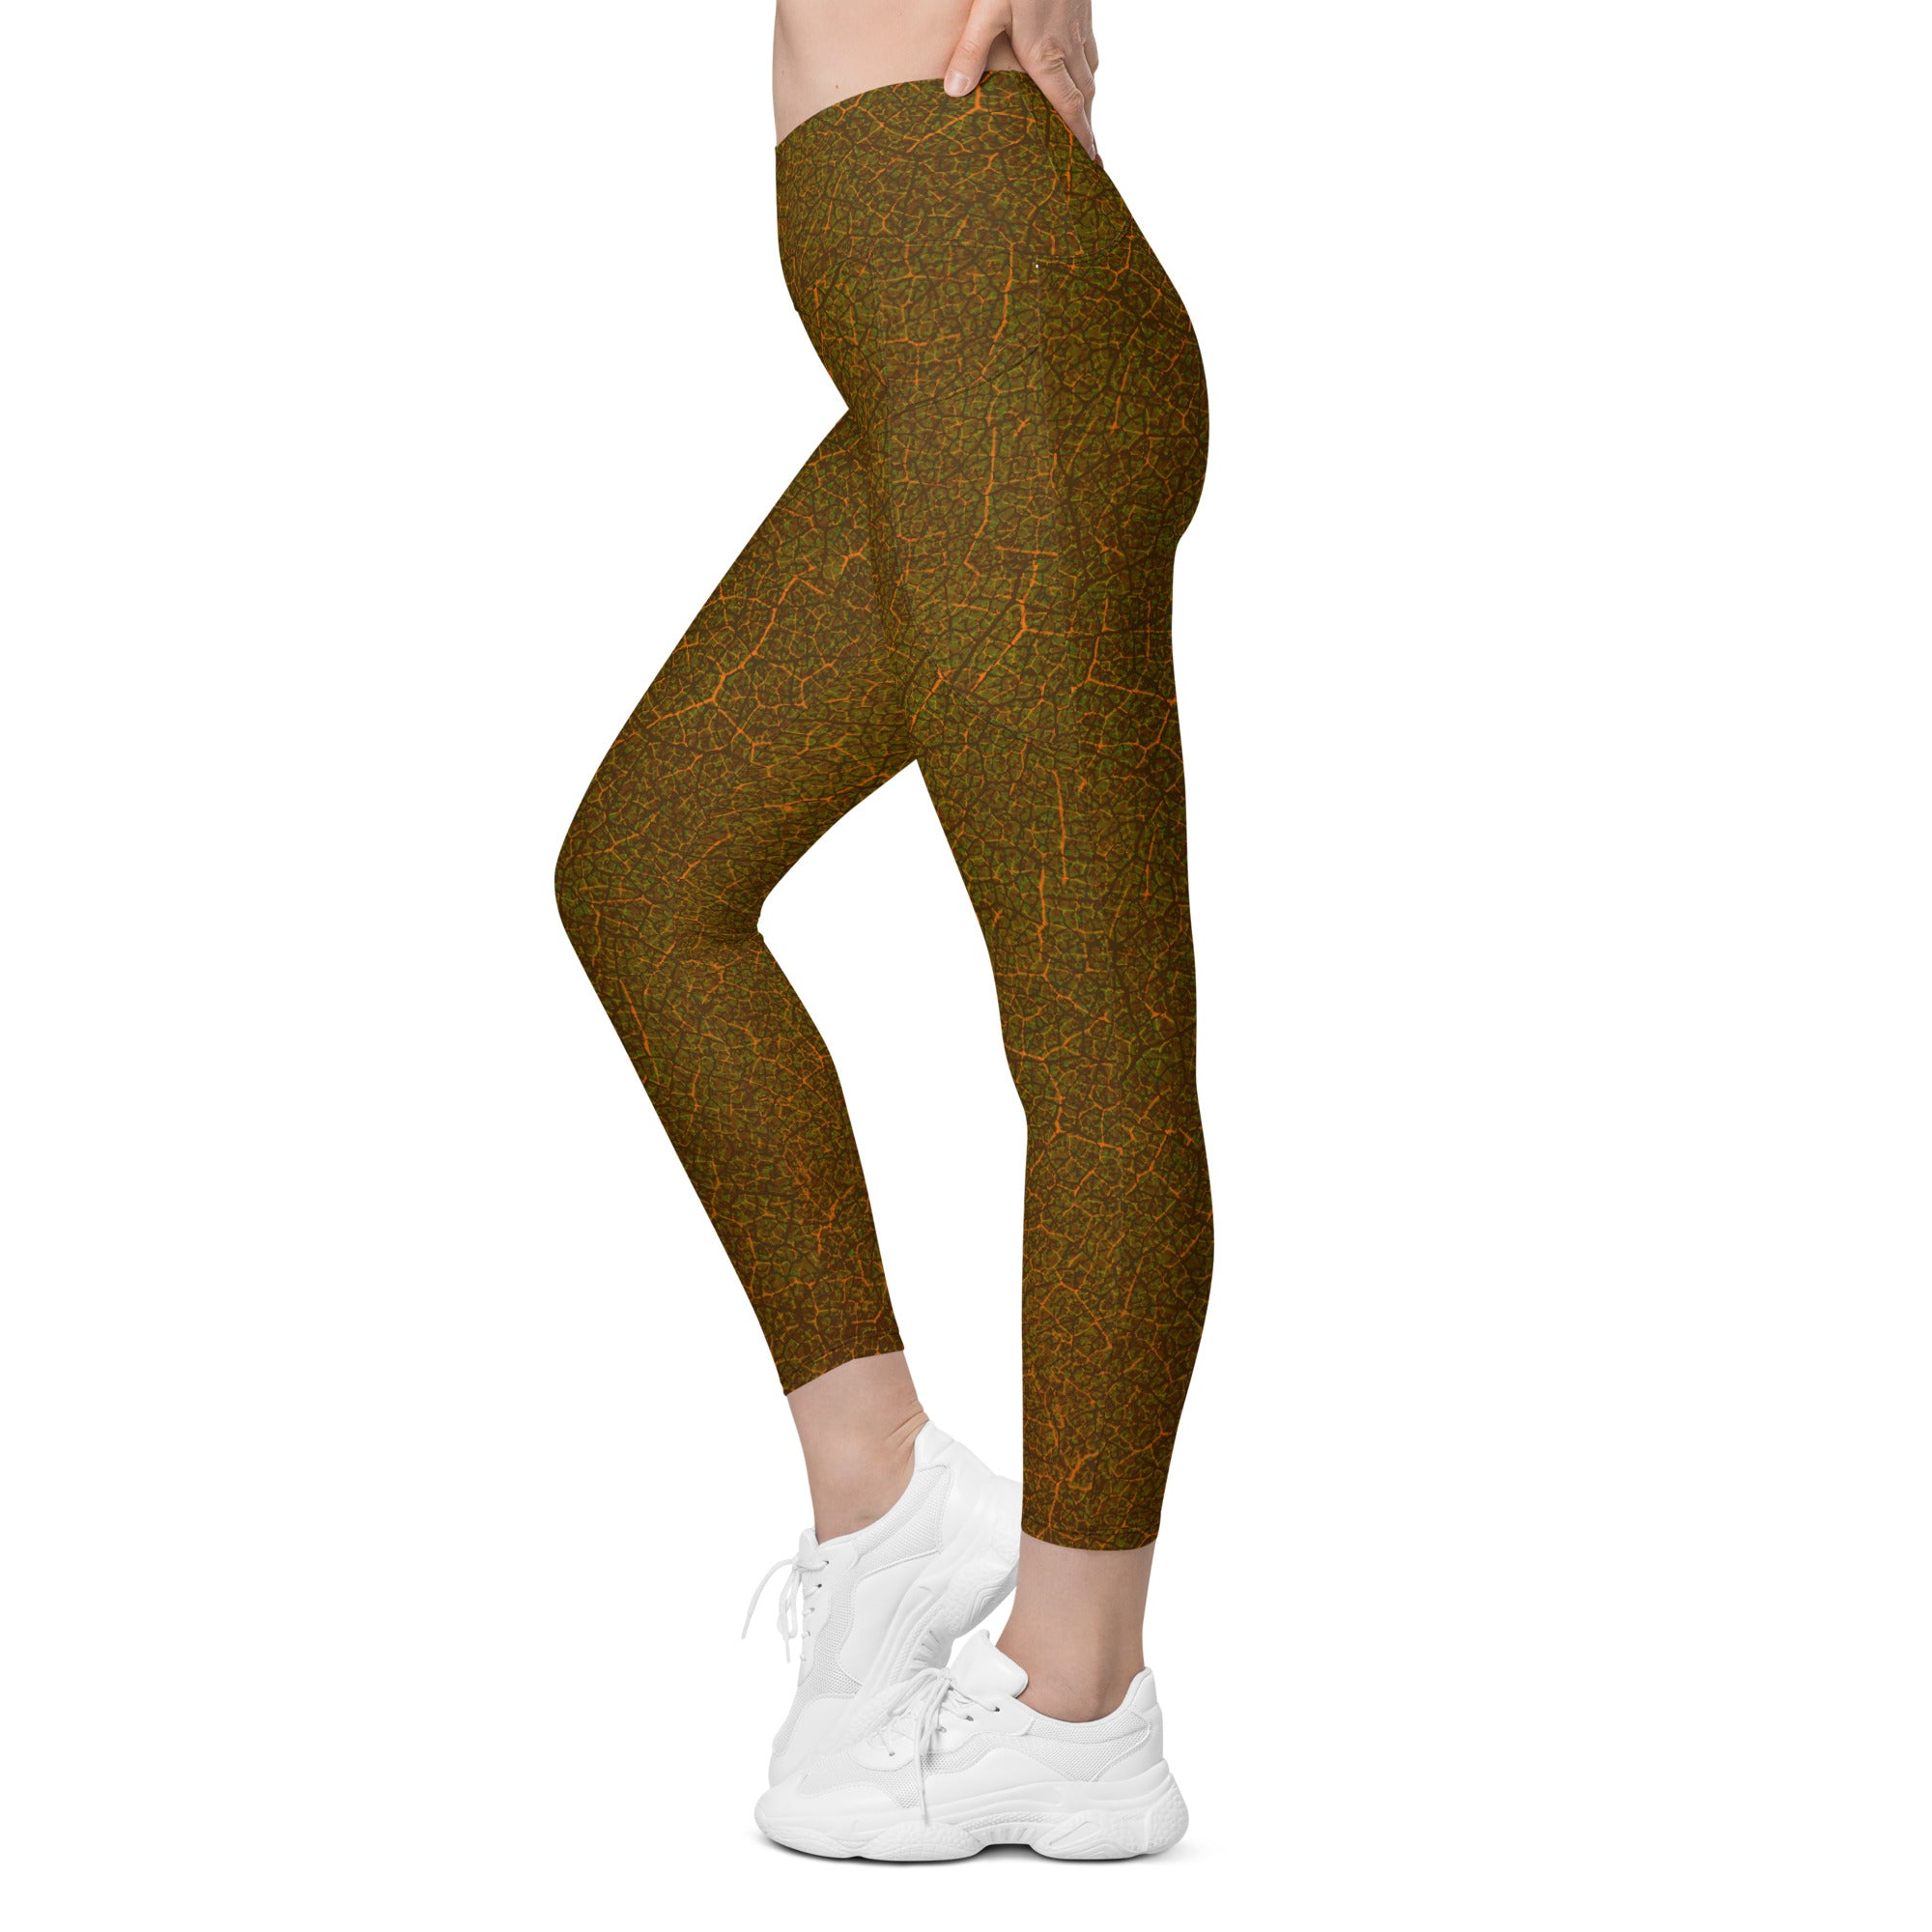 Forest Dreams Leggings with Pockets, displayed to highlight the functionality and detailed forest-inspired design.